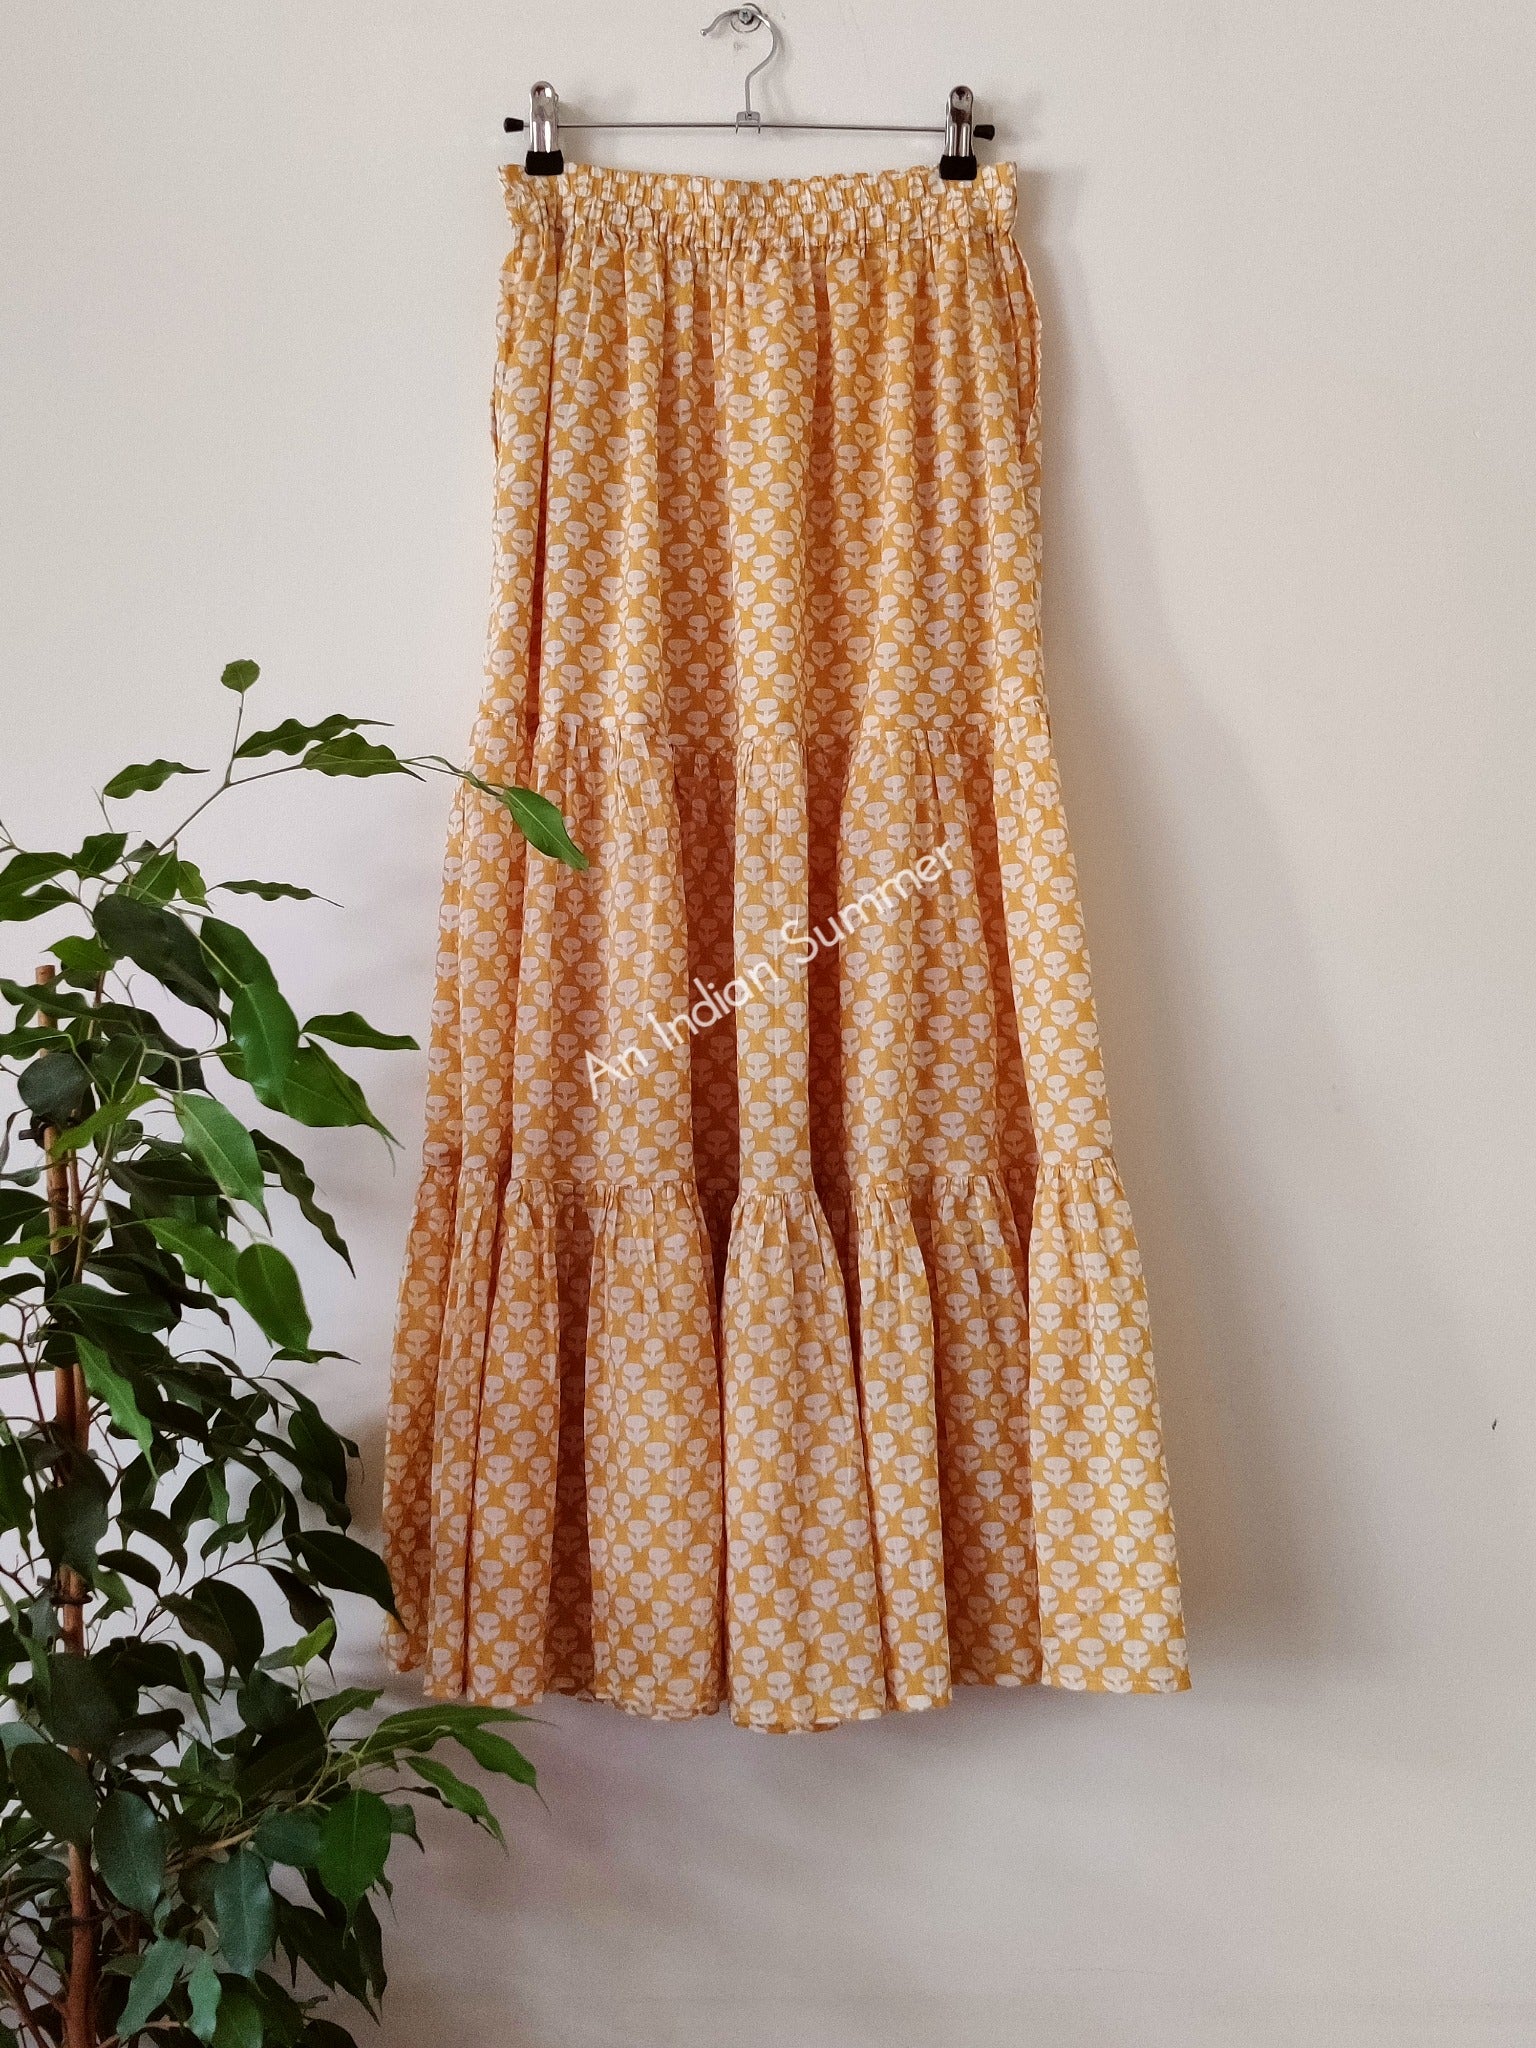 Yellow | Daisy Skirt | Hand Block Printed | Cotton Voile | An Indian Summer | Seasonless Timeless Sustainable Ethical Authentic Artisan Conscious Clothing Lifestyle Brand